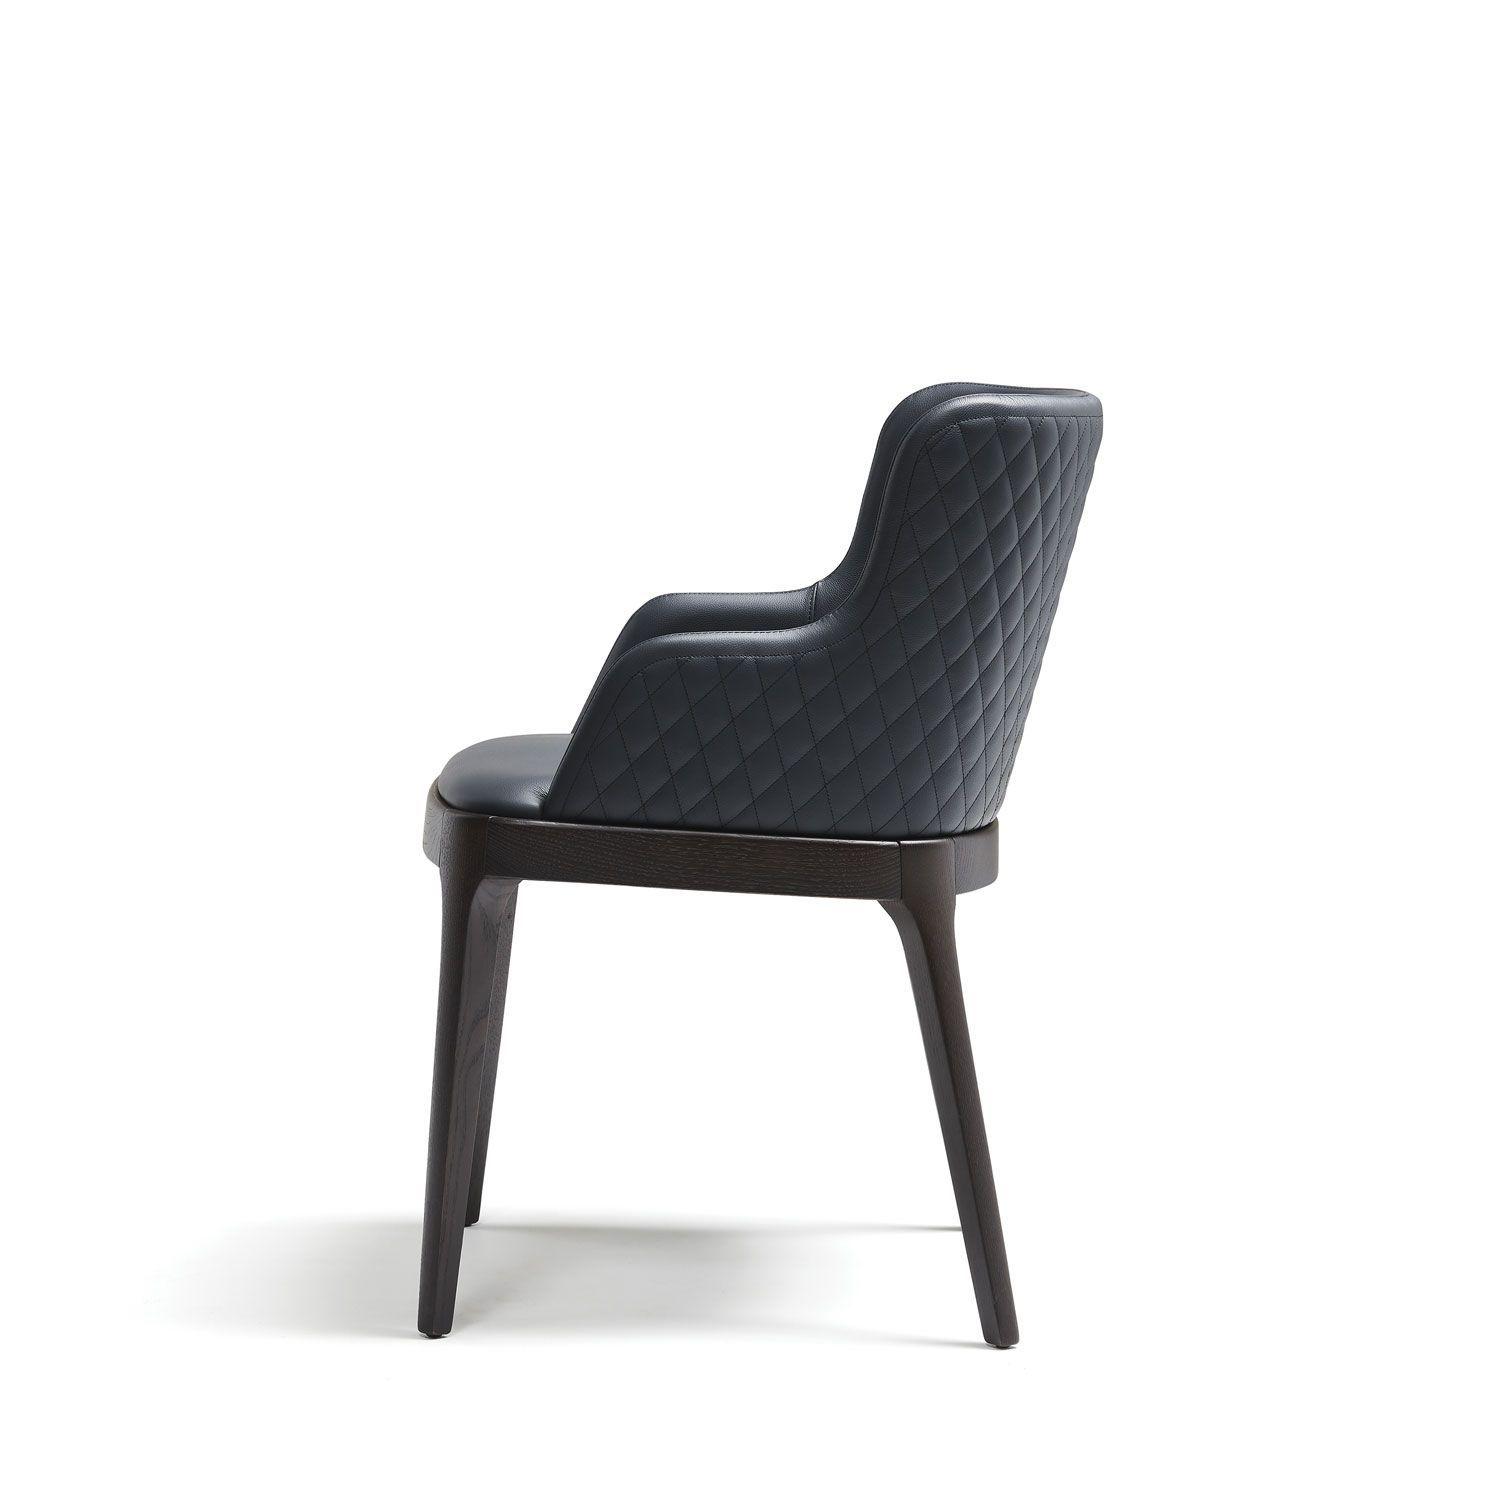 Couture Furniture Logo - Luxury Italian Upholstered Magda Couture Chair - High-end Italian ...